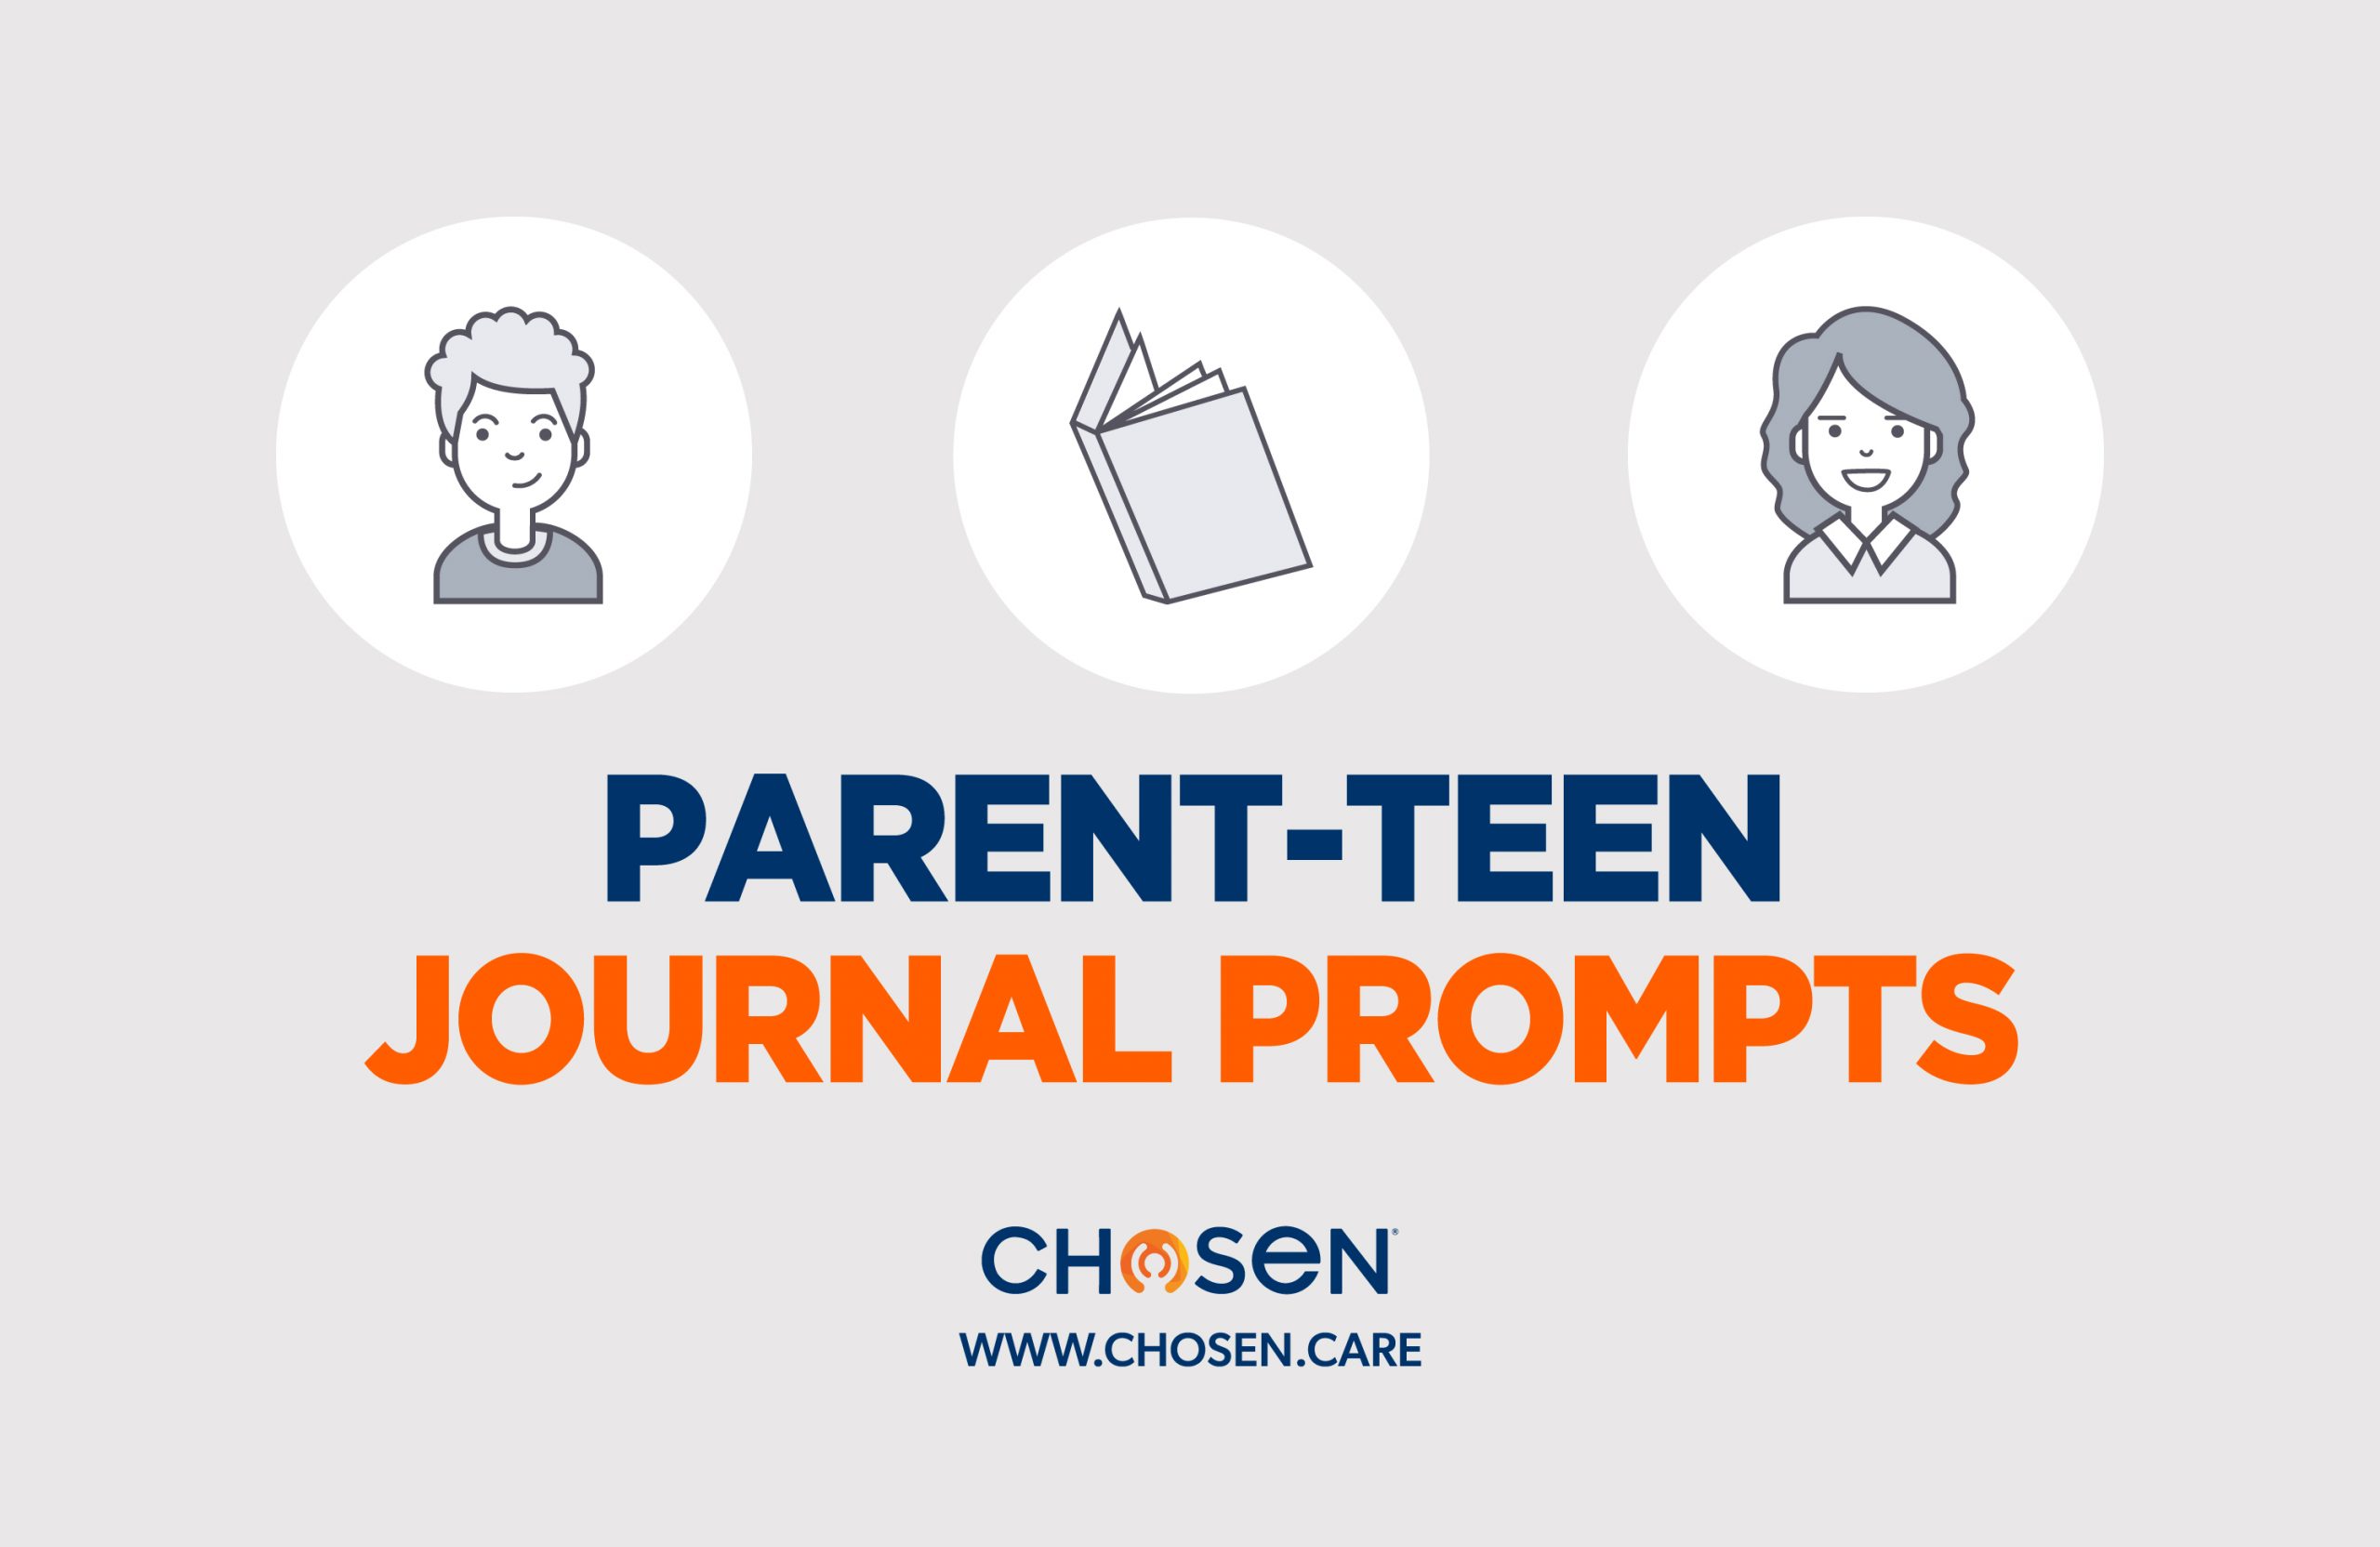 Parenting Teens, Parenting Help, Parenting Teenager, Parent Teen Journal Prompts, Connecting with your teen